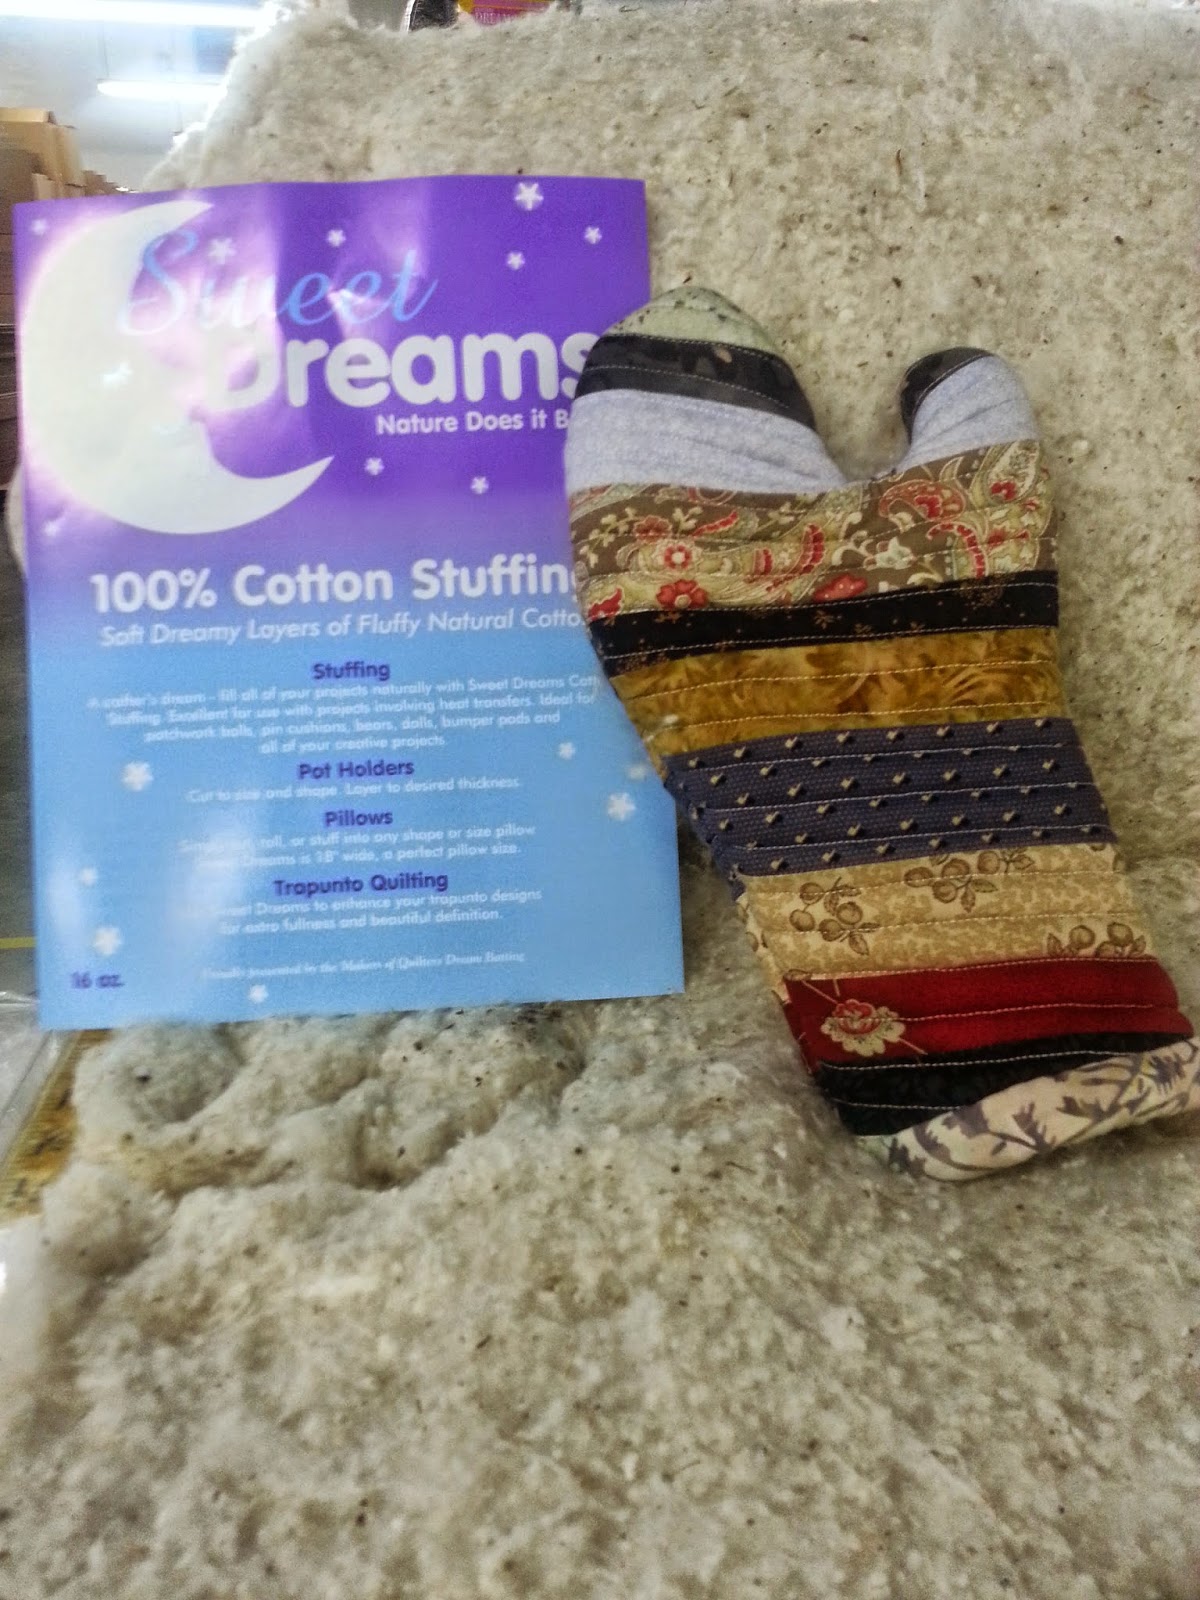 QUILTERS DREAM BATTING: Sweet Dream 100% Cotton Stuffing: The